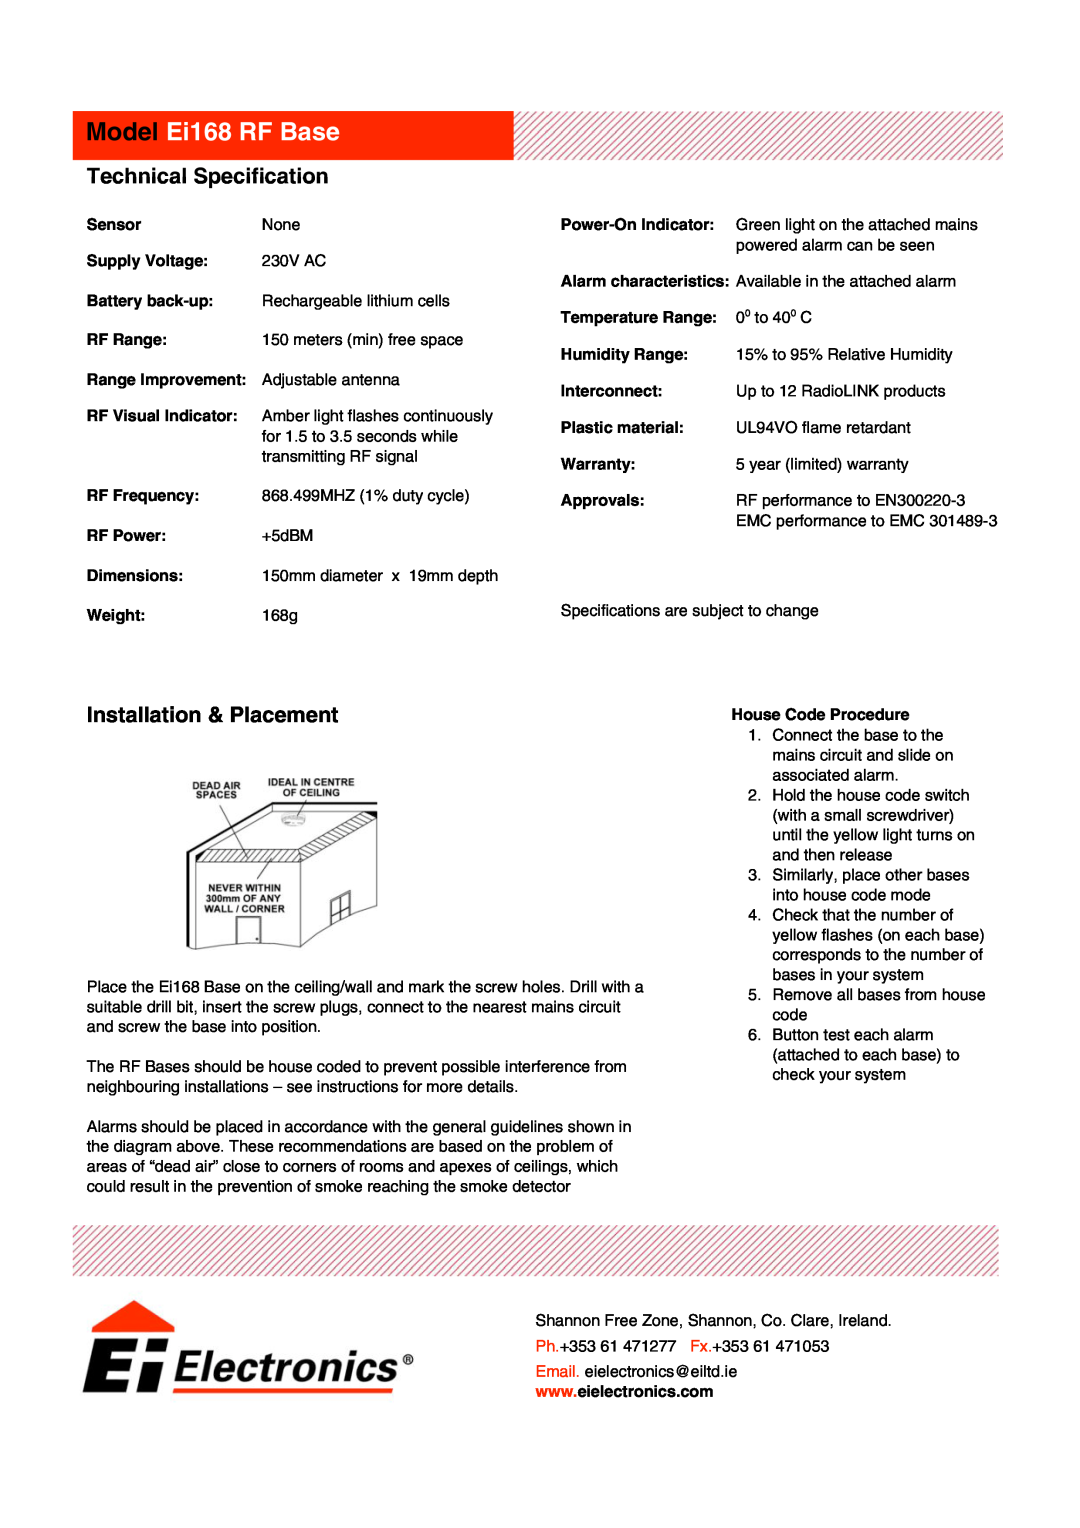 Ei Electronics manual Technical Specification, Installation & Placement, Model Ei168 RF Base 